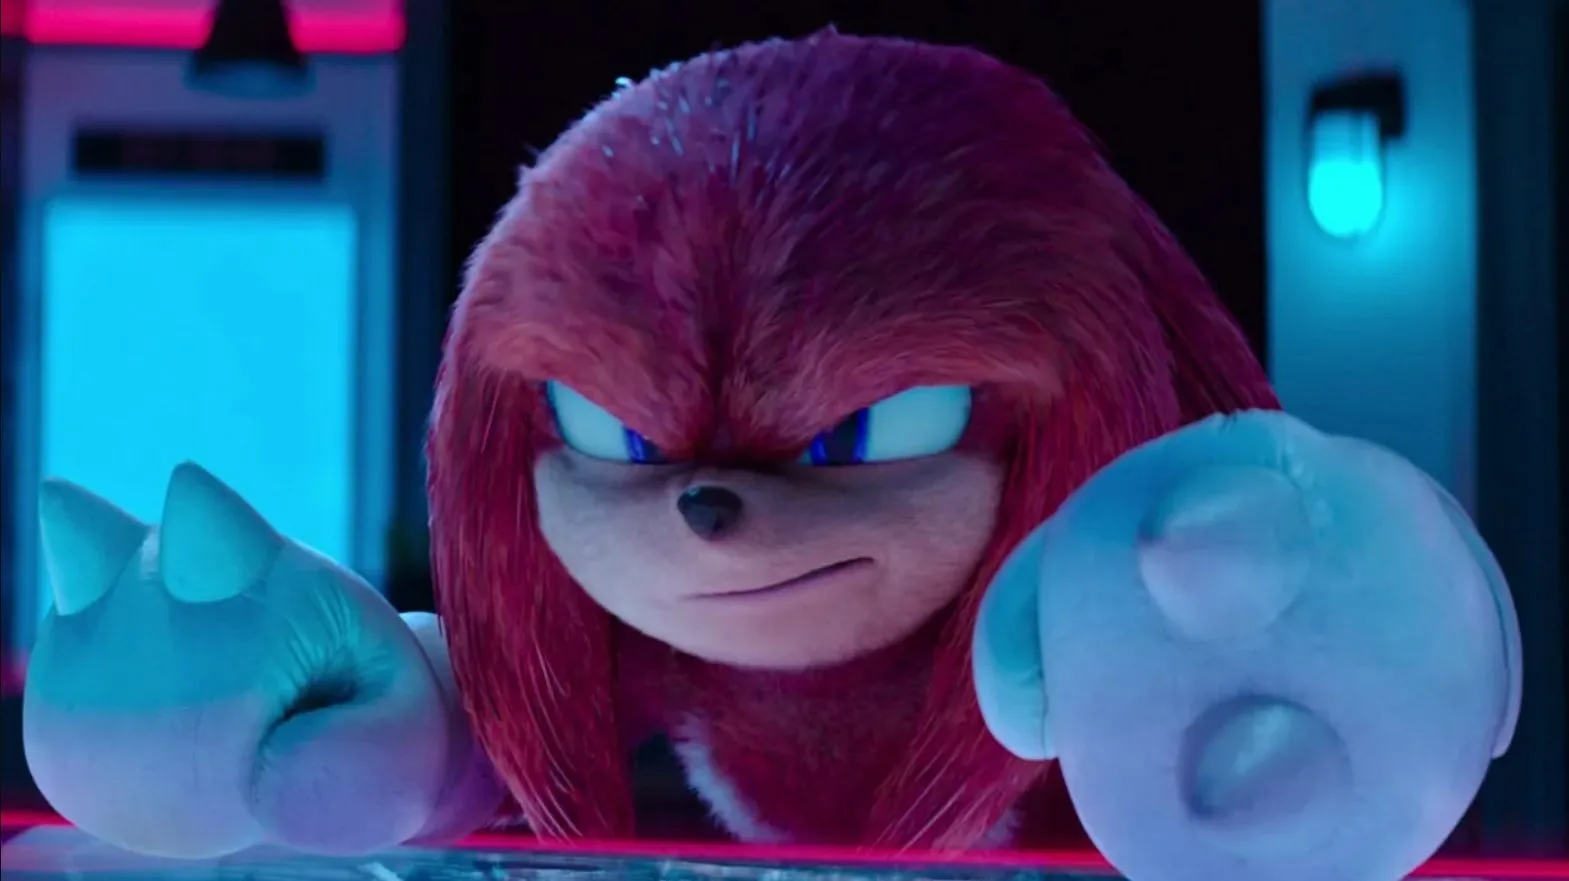 Knuckles Cast Unveiled for Sonic the Hedgehog Spin-off Series